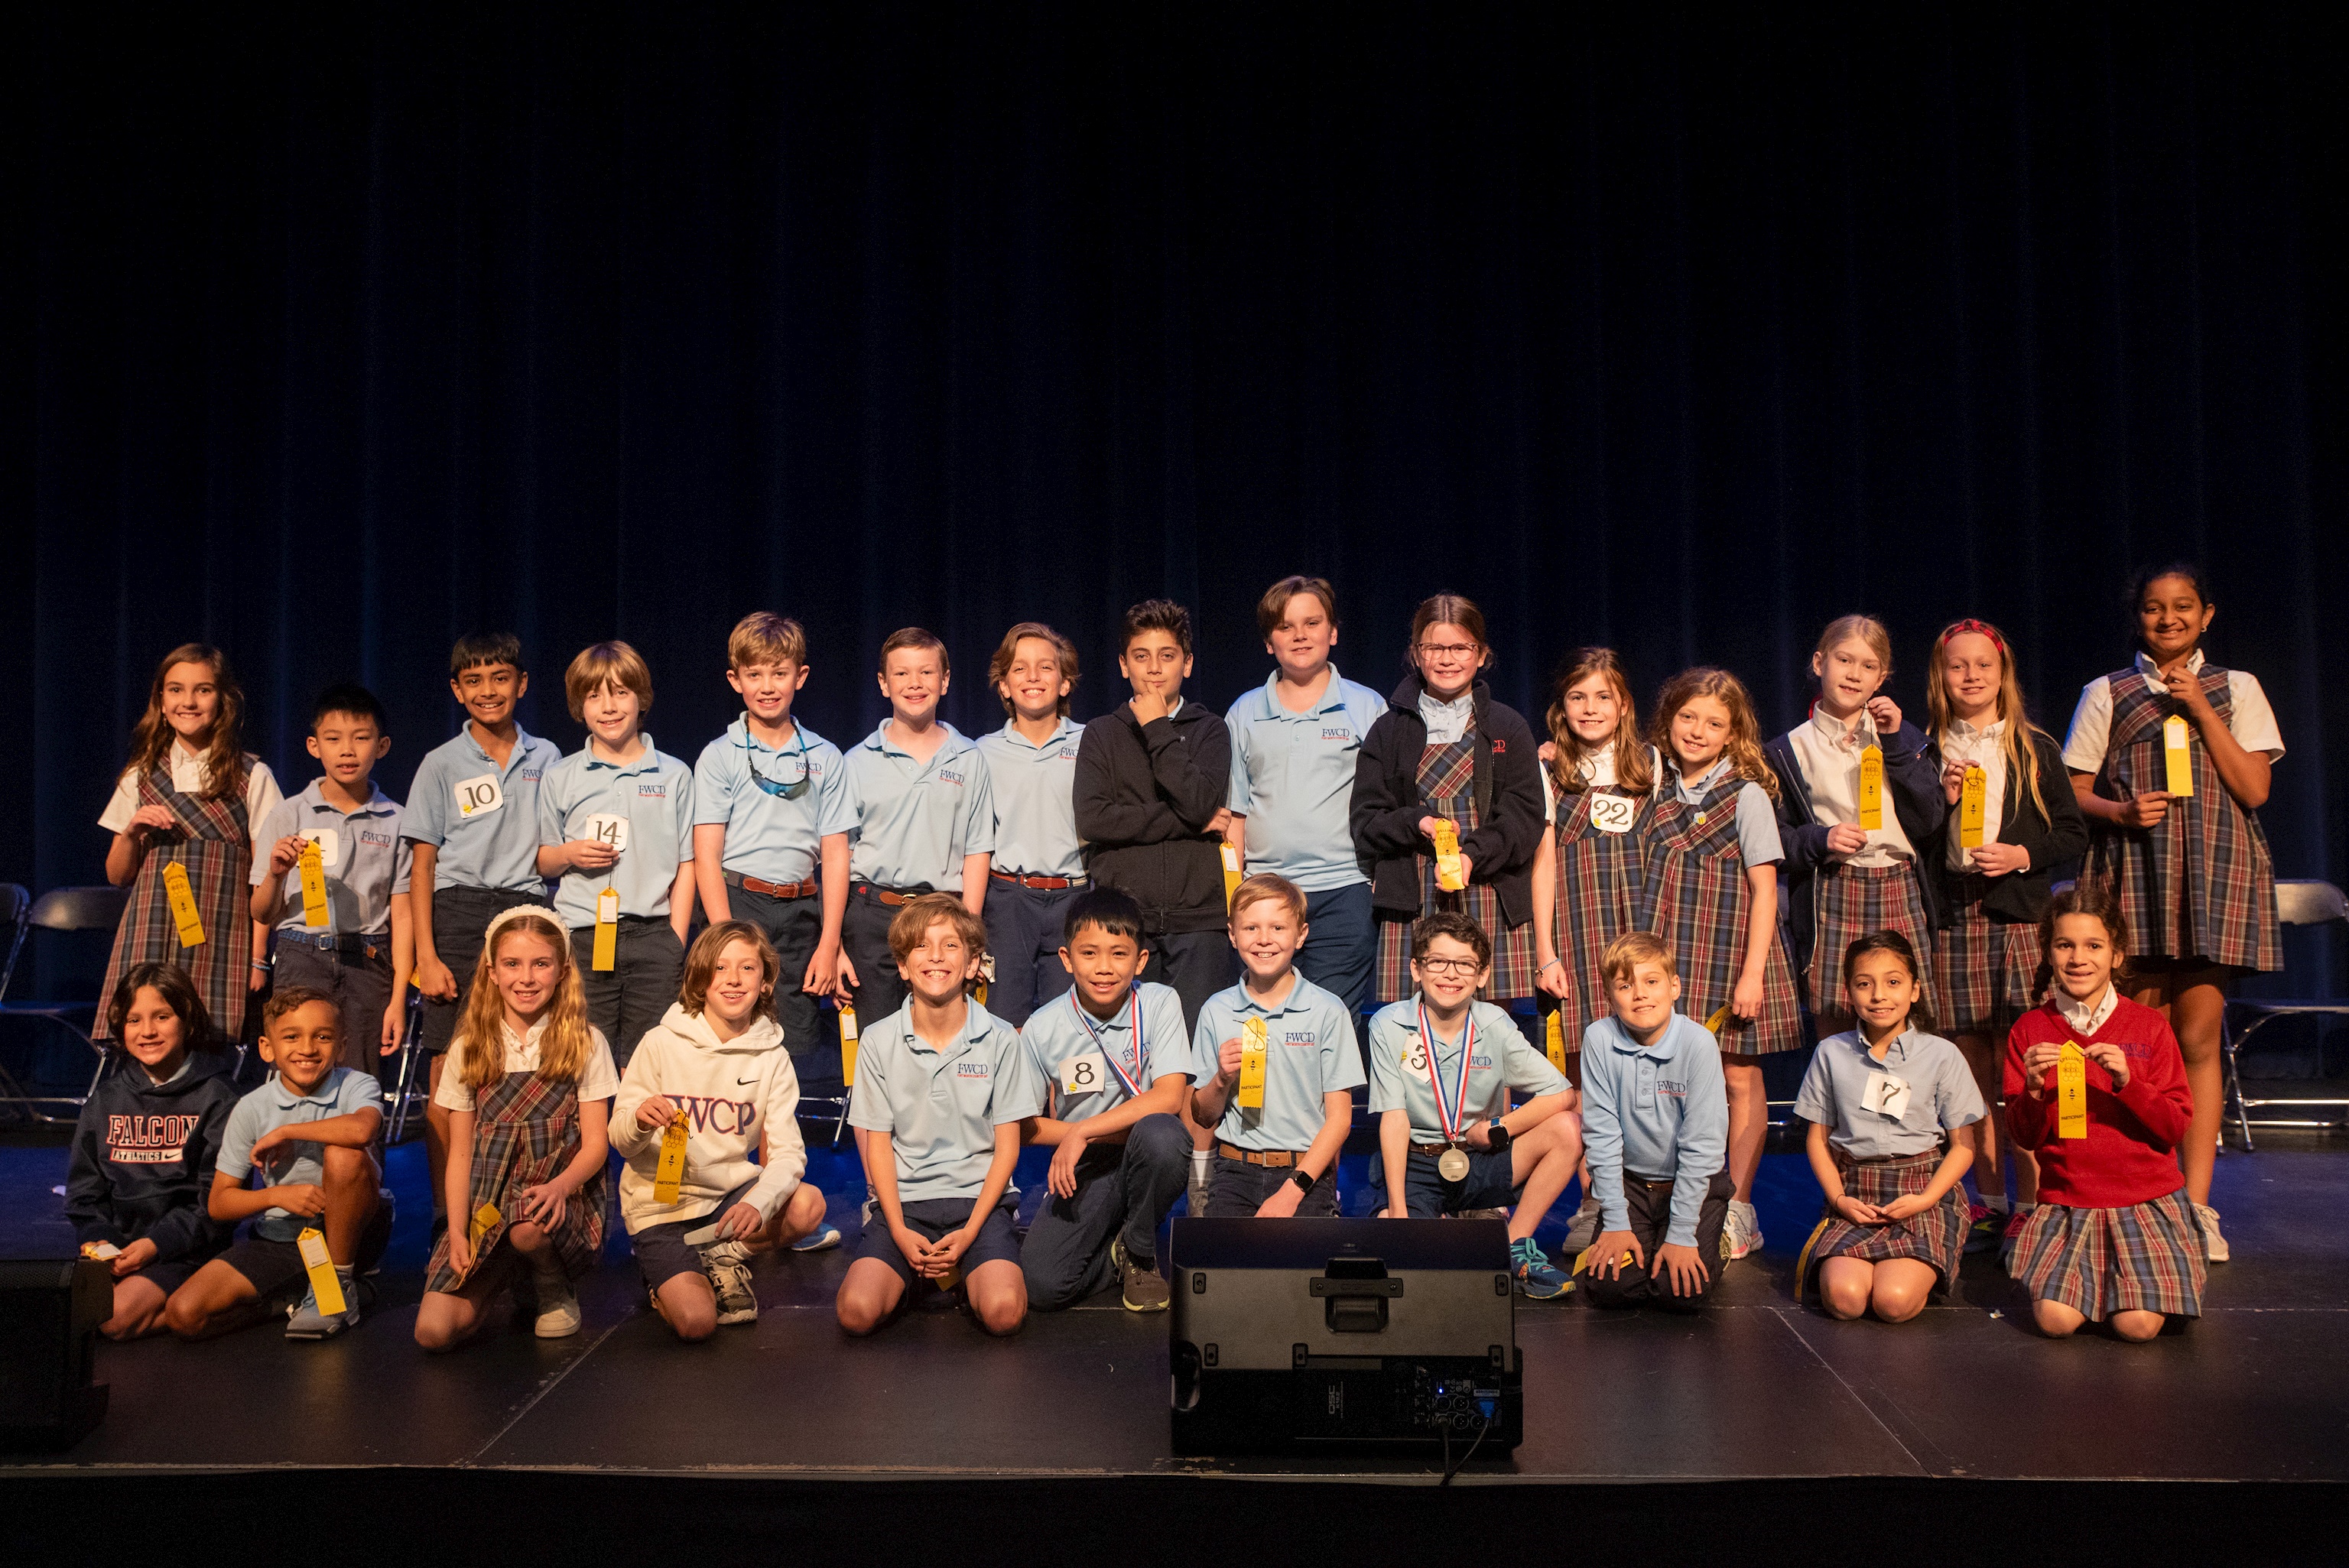 26 Students Step Up to the Spelling Bee Challenge